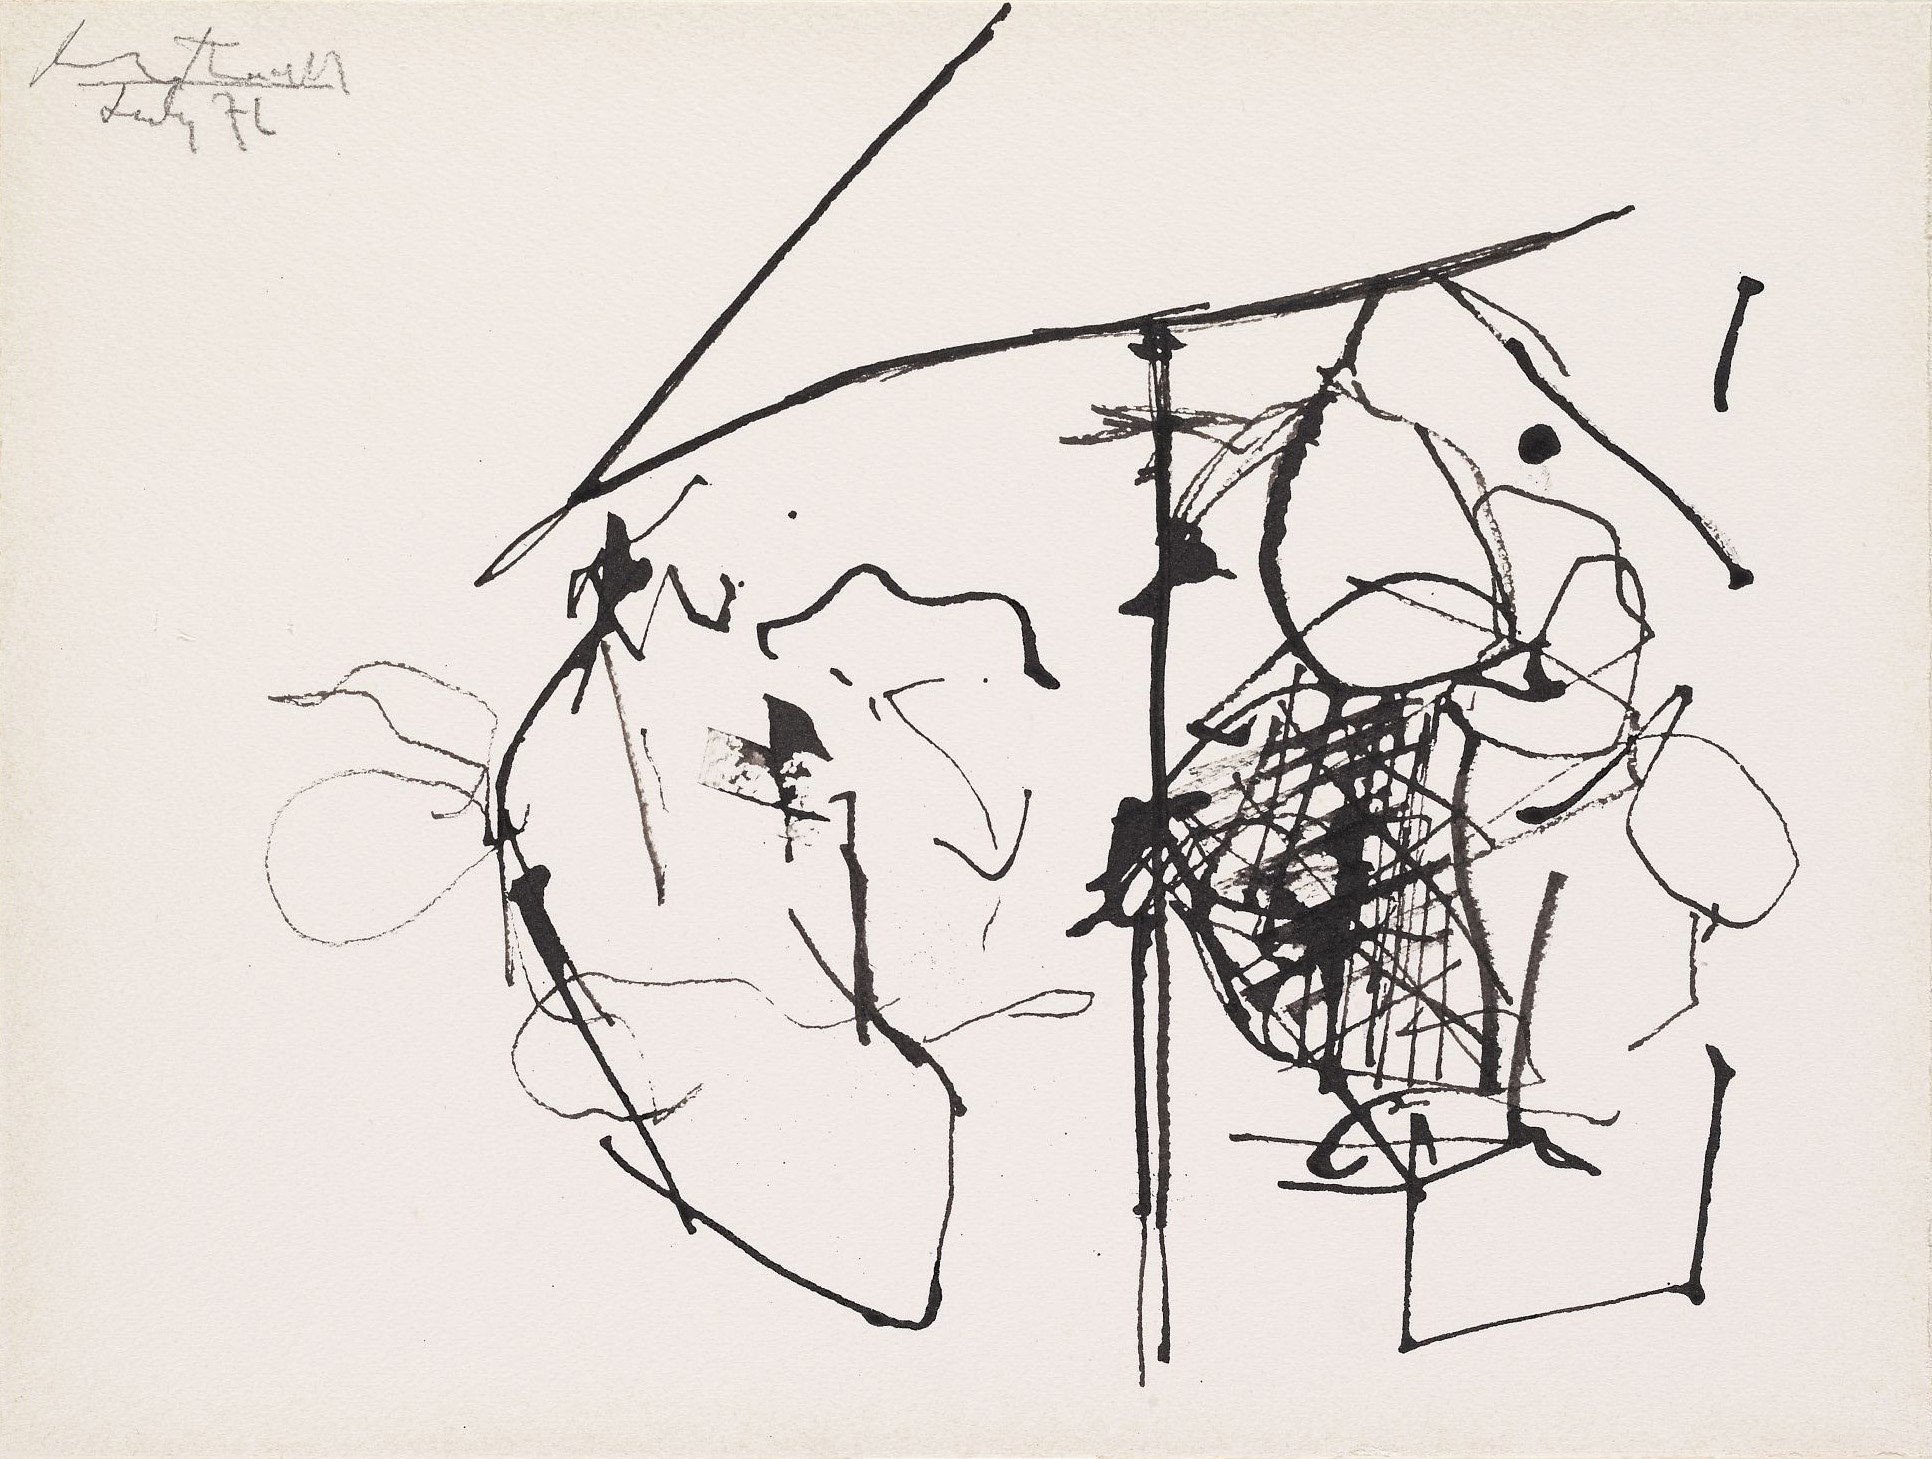 Untitled, 1976, ink on paper, 9 ✕ 12 in. (22.9 ✕ 30.5 cm)